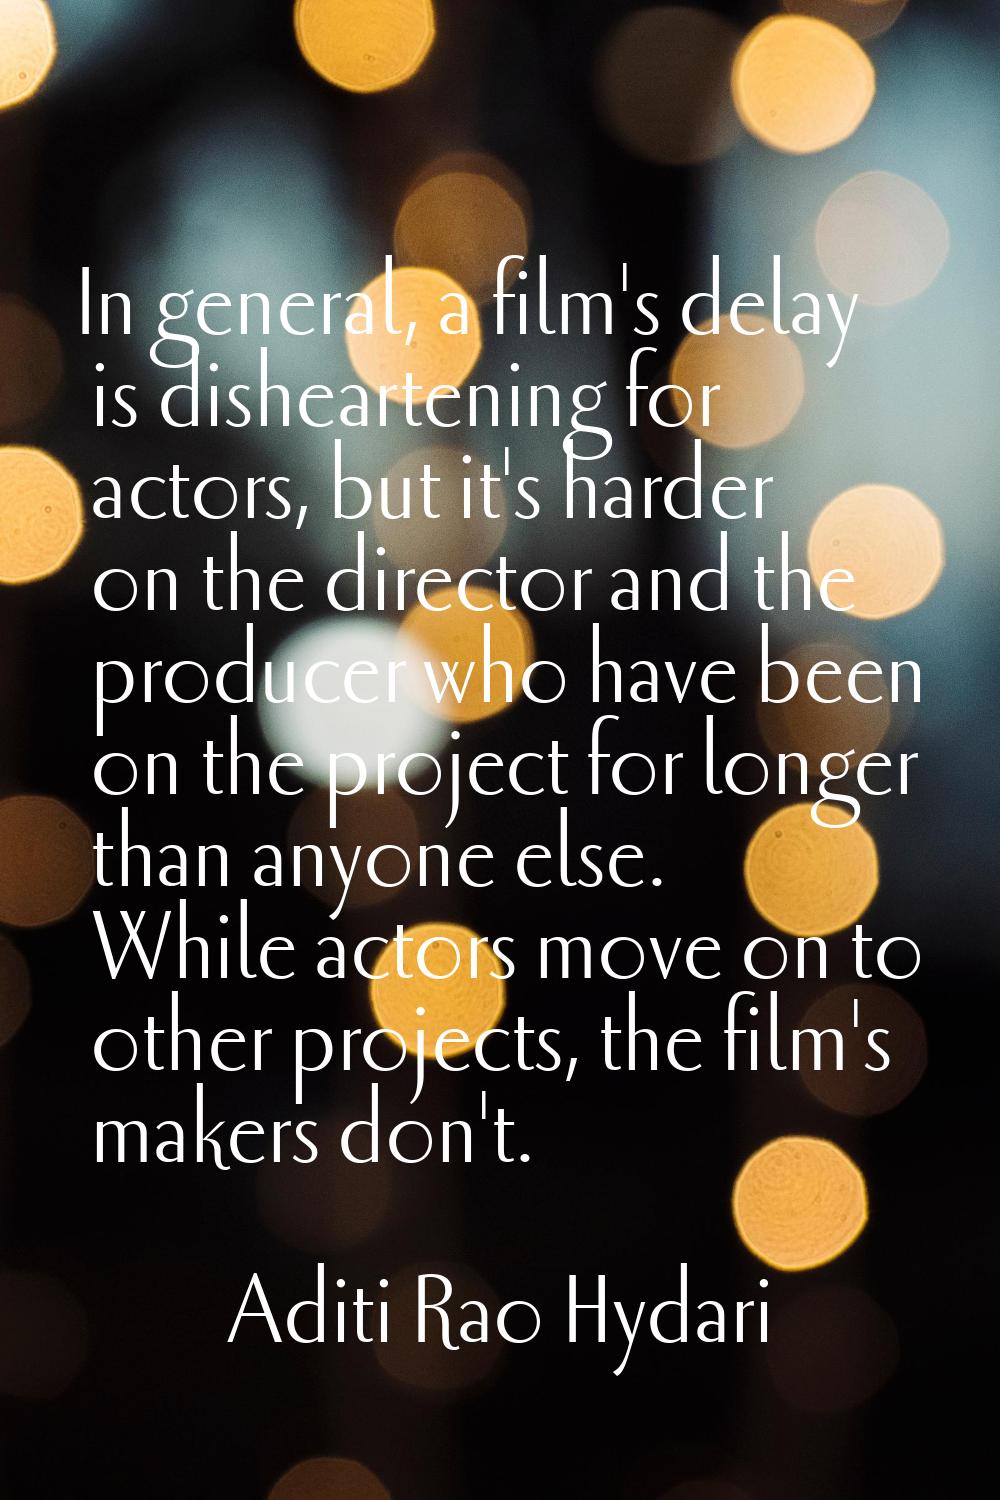 In general, a film's delay is disheartening for actors, but it's harder on the director and the pro